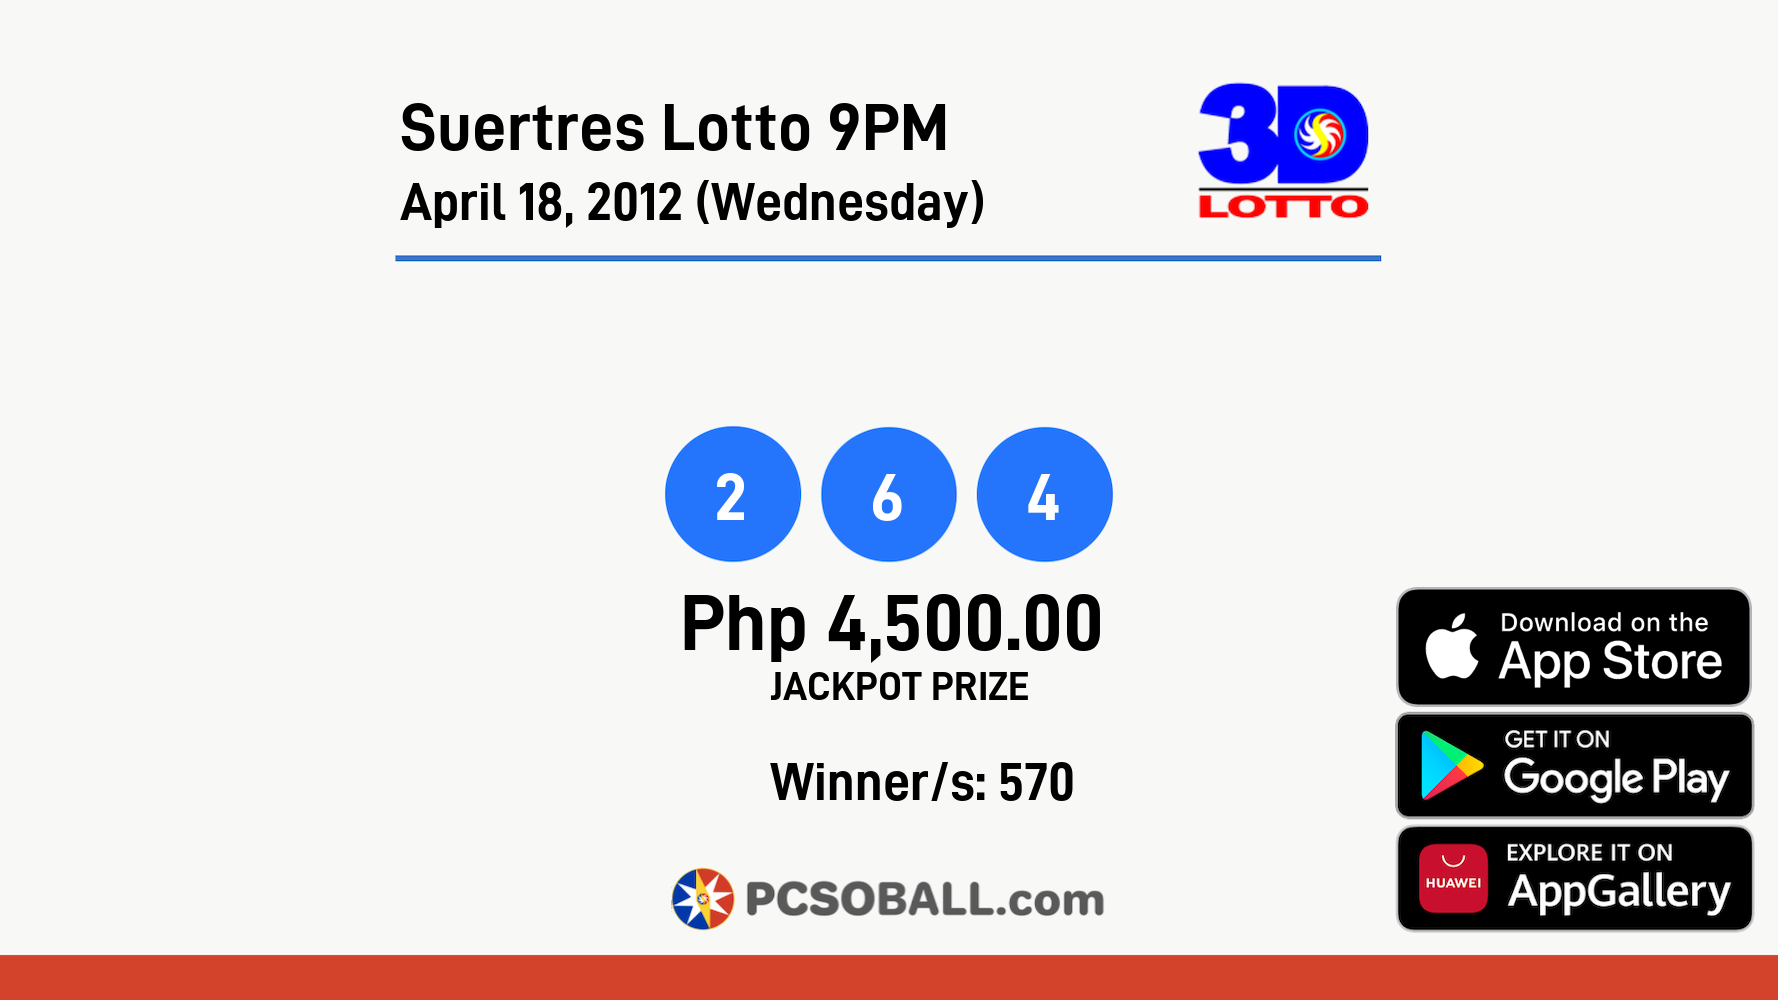 Suertres Lotto 9PM April 18, 2012 (Wednesday) Result